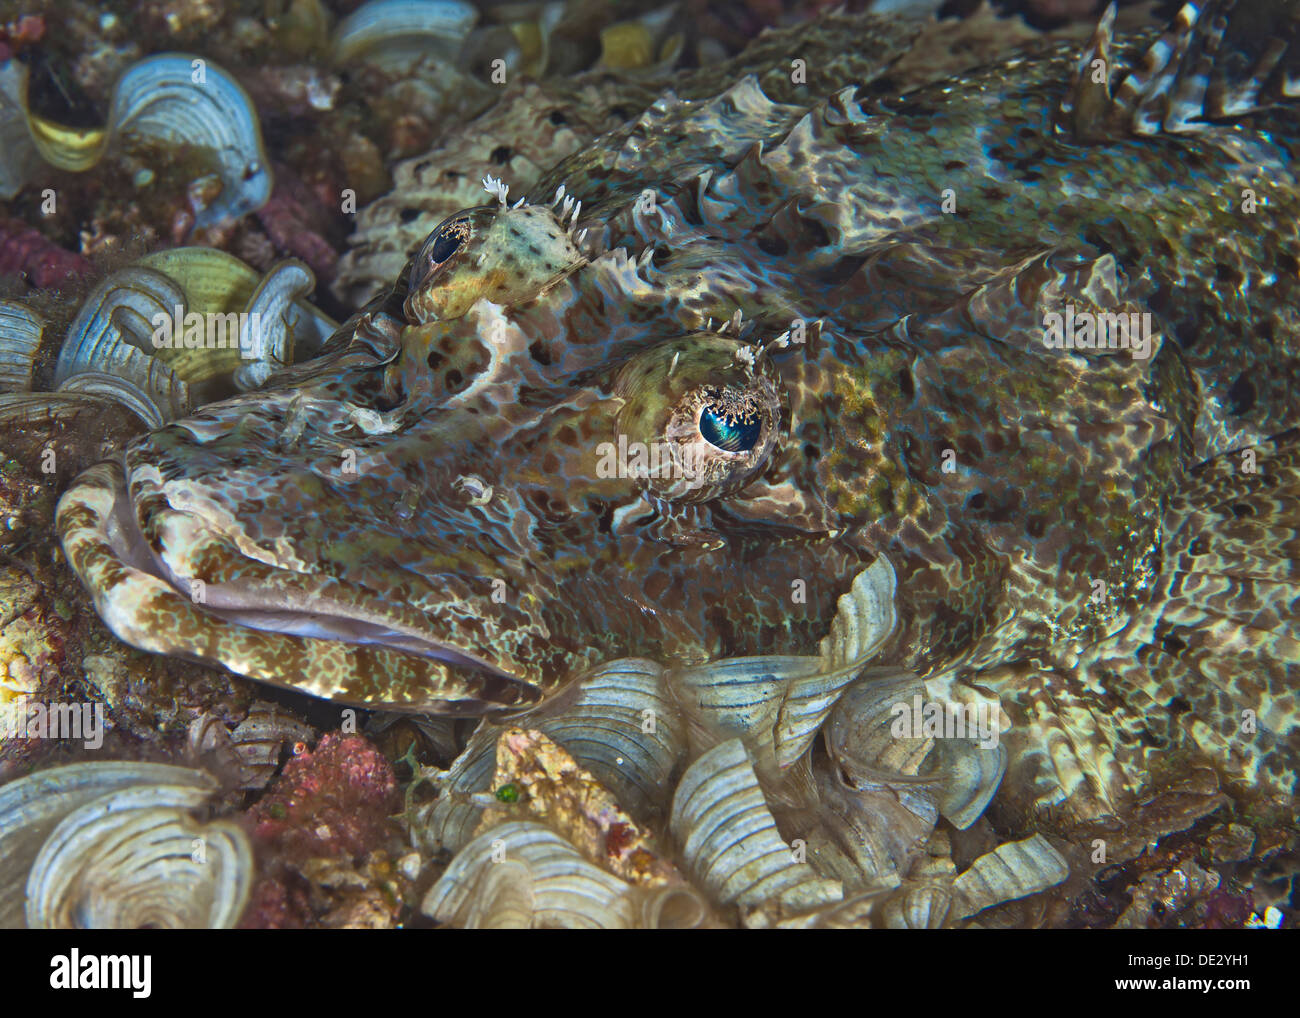 Close up headshot of a Crocodile fish on sea floor camouflaged among coral reef elements. Stock Photo